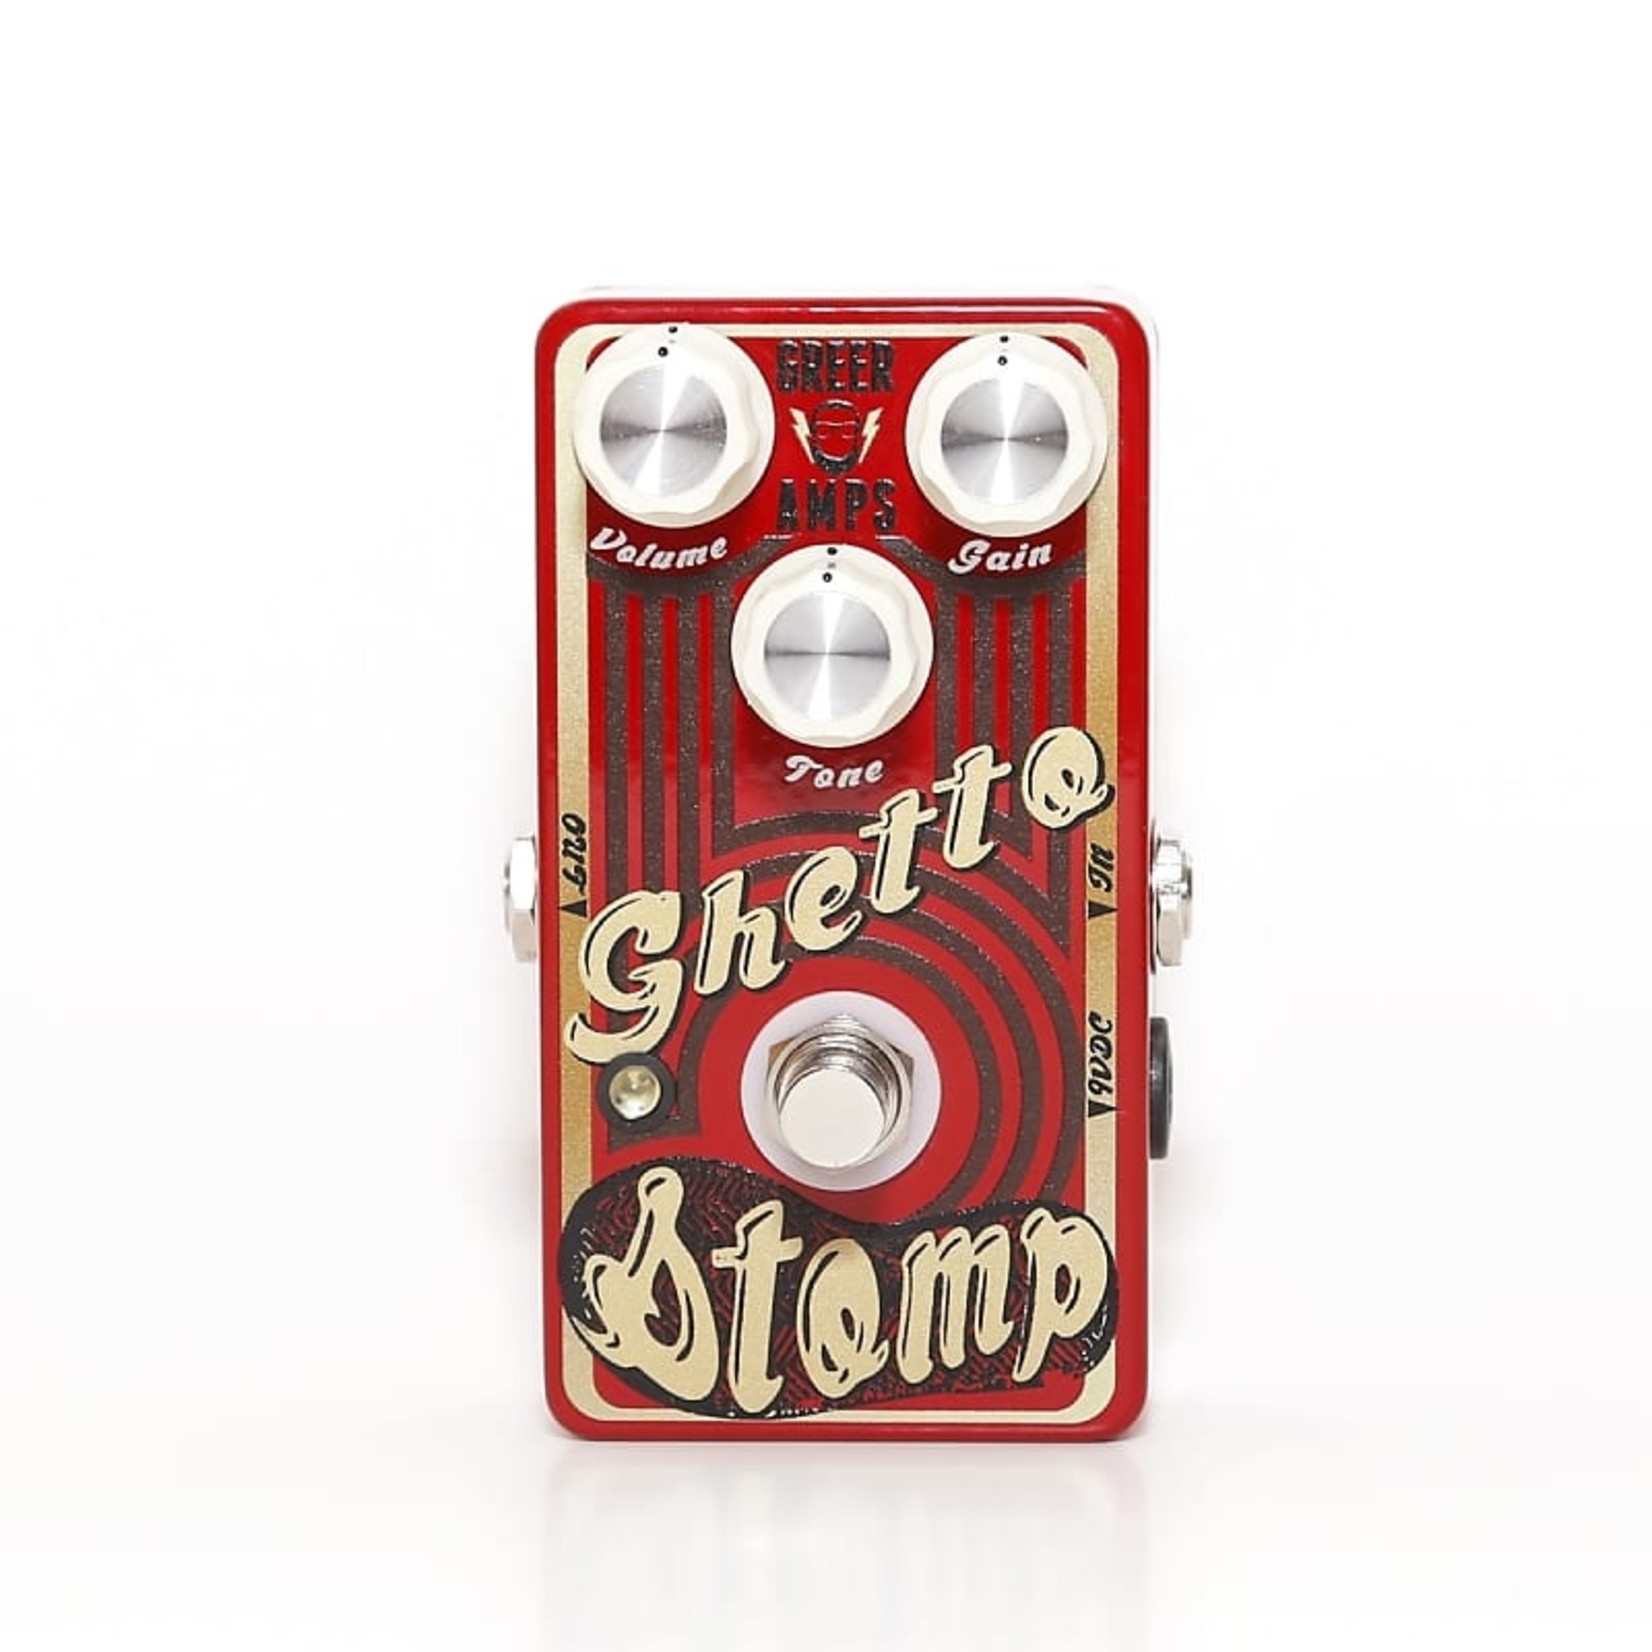 Greer Amps Greer Amps Ghetto Stomp Fuzz/Distortion